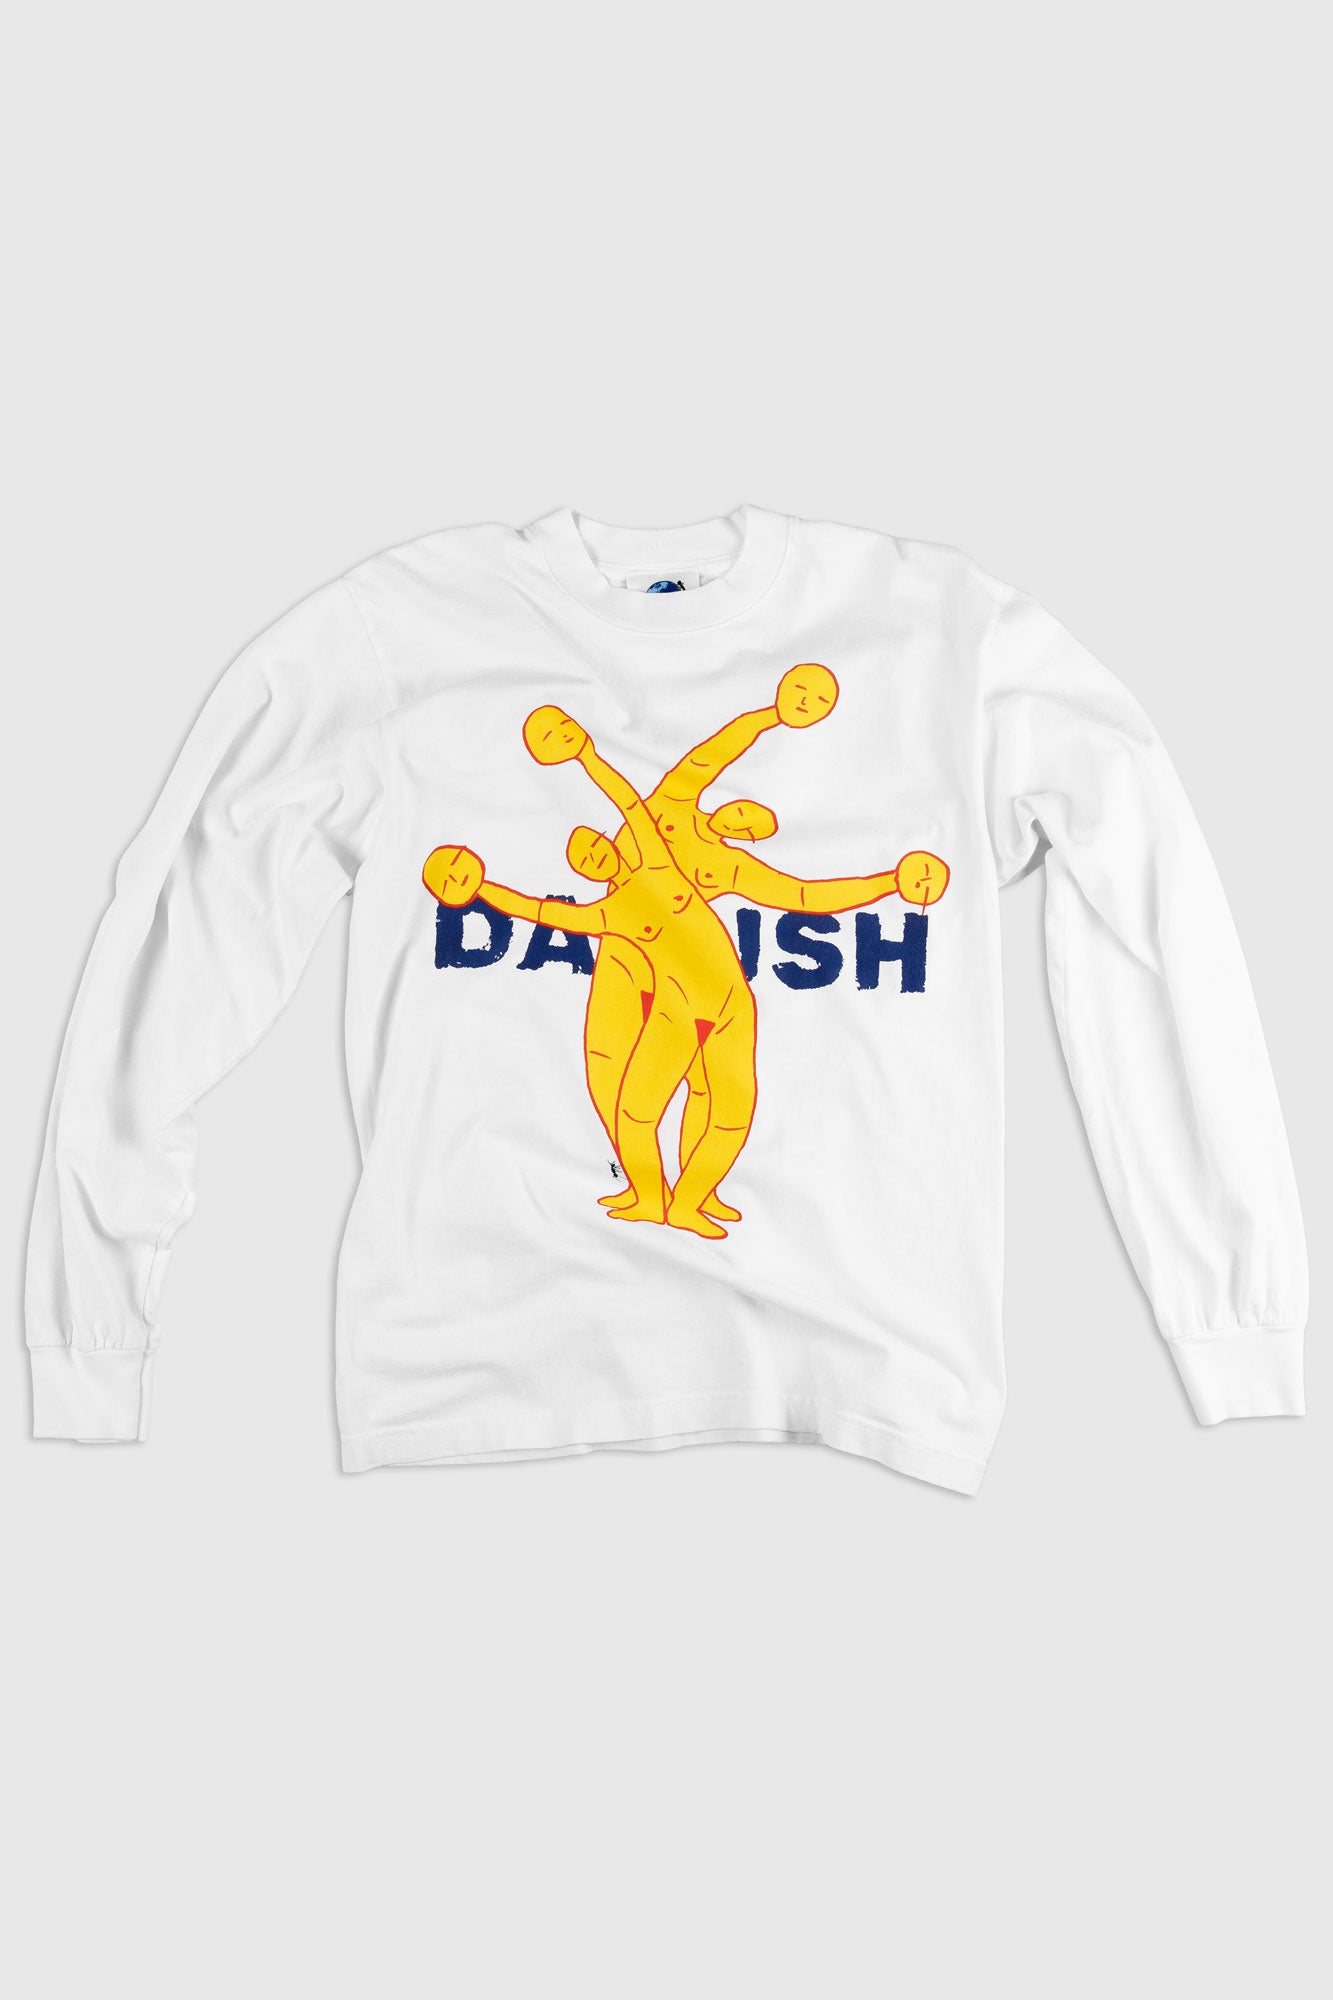 DABUSH SYNERGY LONG SLEEVE T-SHIRT. TEAMWORK MAKES THE DREAM WORK. 100% Cotton, oversized long sleeves tee with huge front and back print. Made in Tel aviv. Shop and view the latest Drops from the official DABUSH website. Worldwide Shipping. 